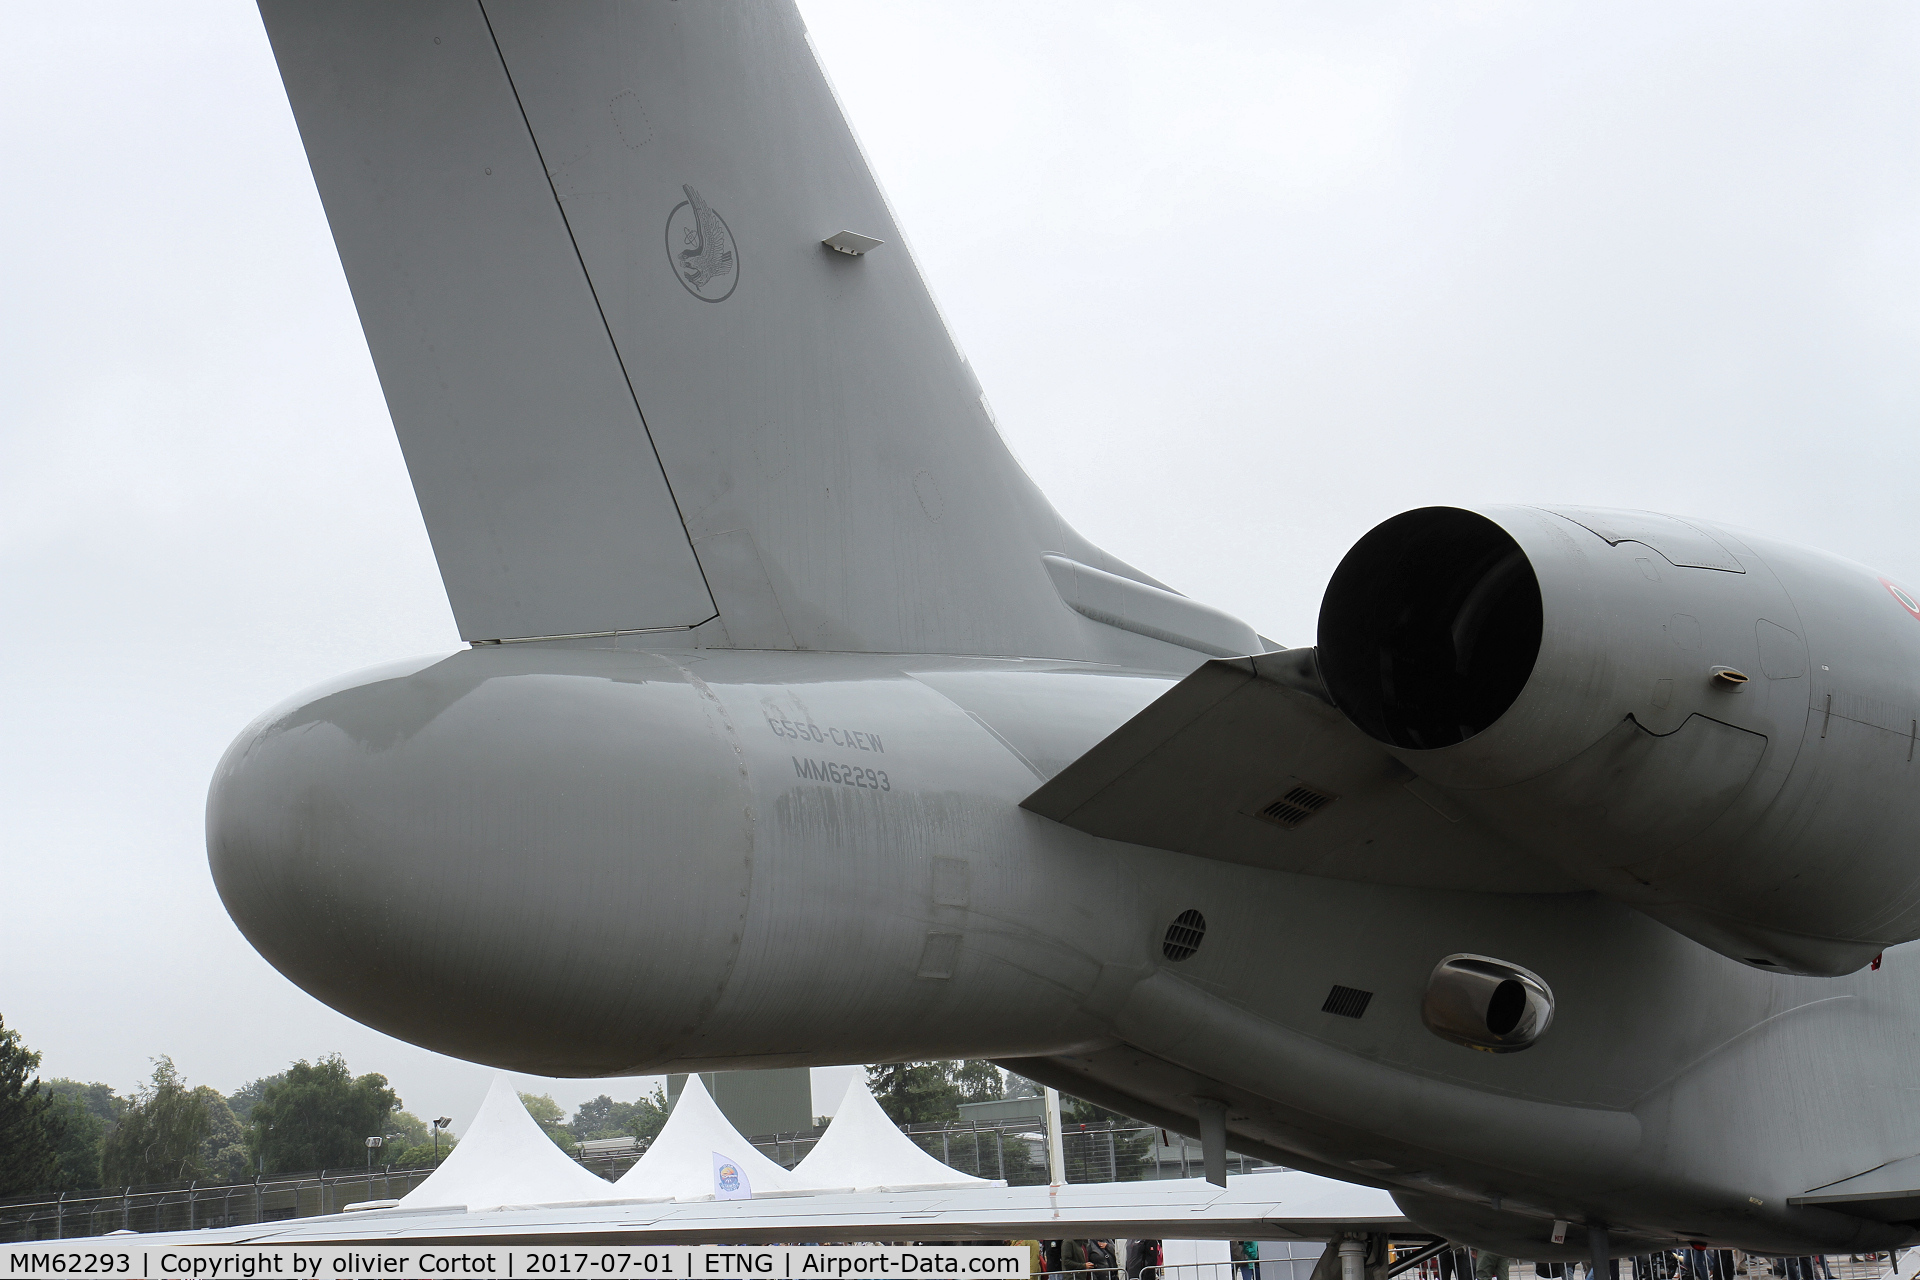 MM62293, 2013 Gulfstream E-550A (GV-SP) AEW C/N 5429, rear radome and serial number